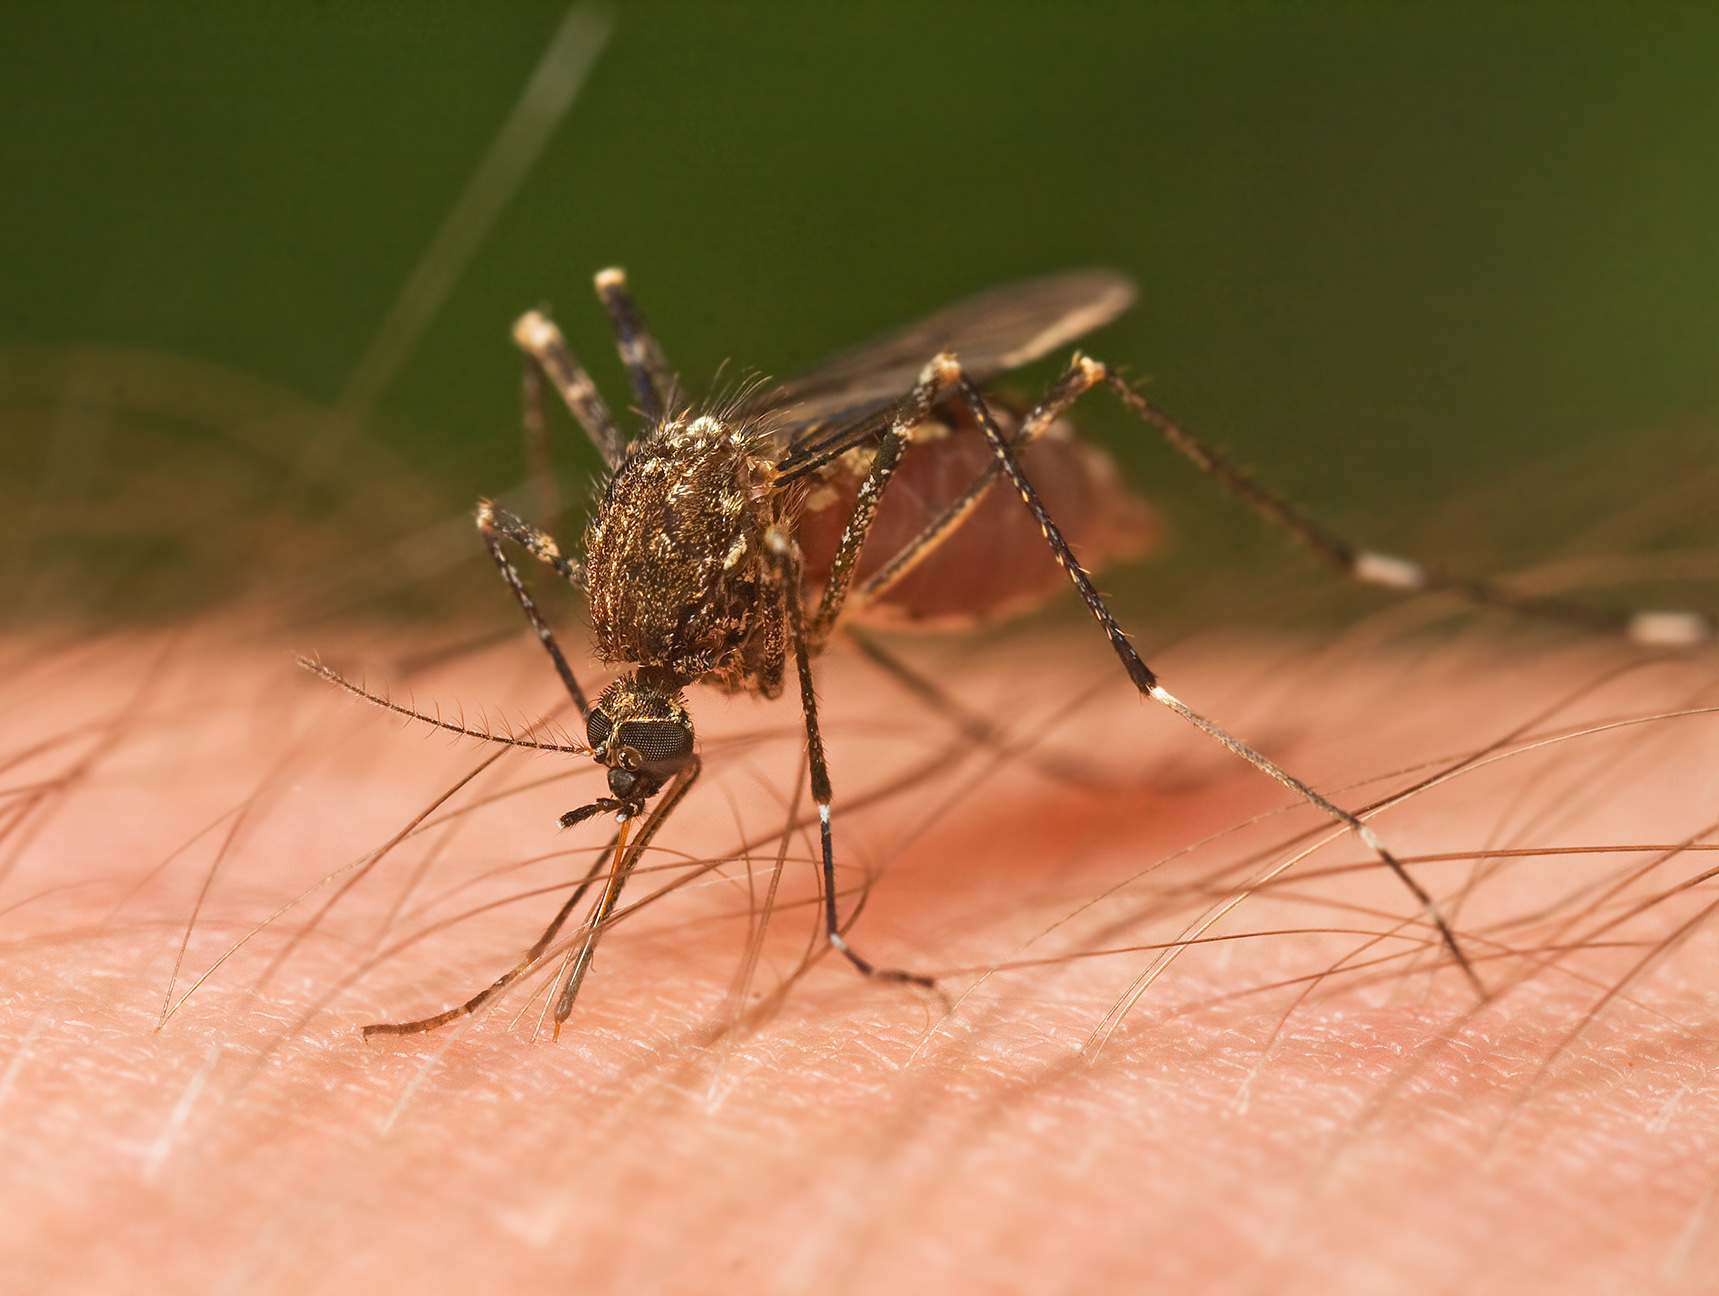 Department of Public Health gives tips on preventing illnesses from mosquito bites